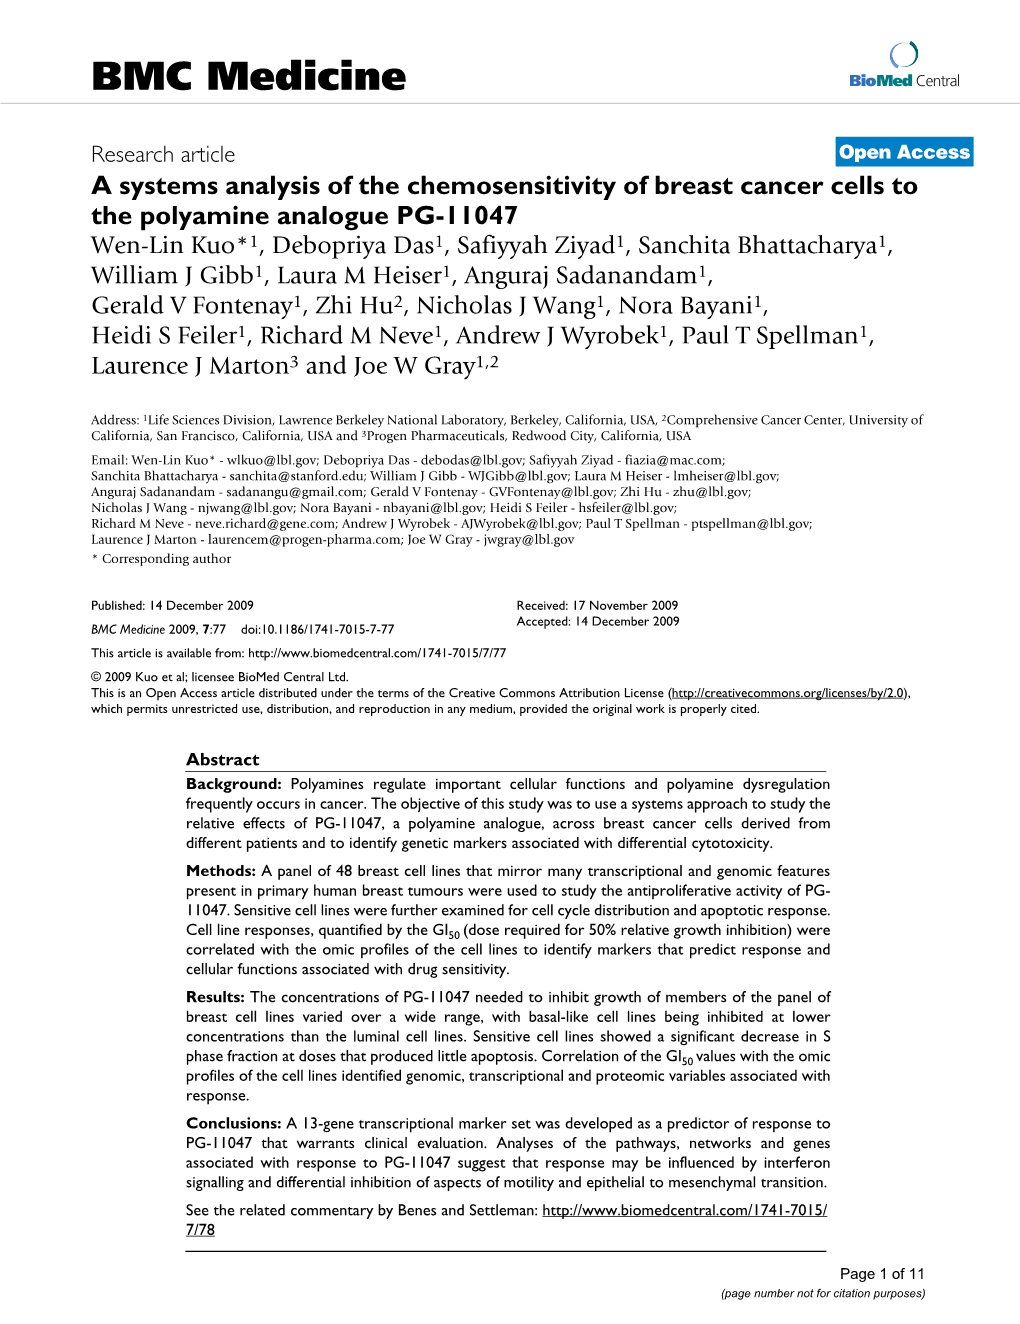 A Systems Analysis of the Chemosensitivity of Breast Cancer